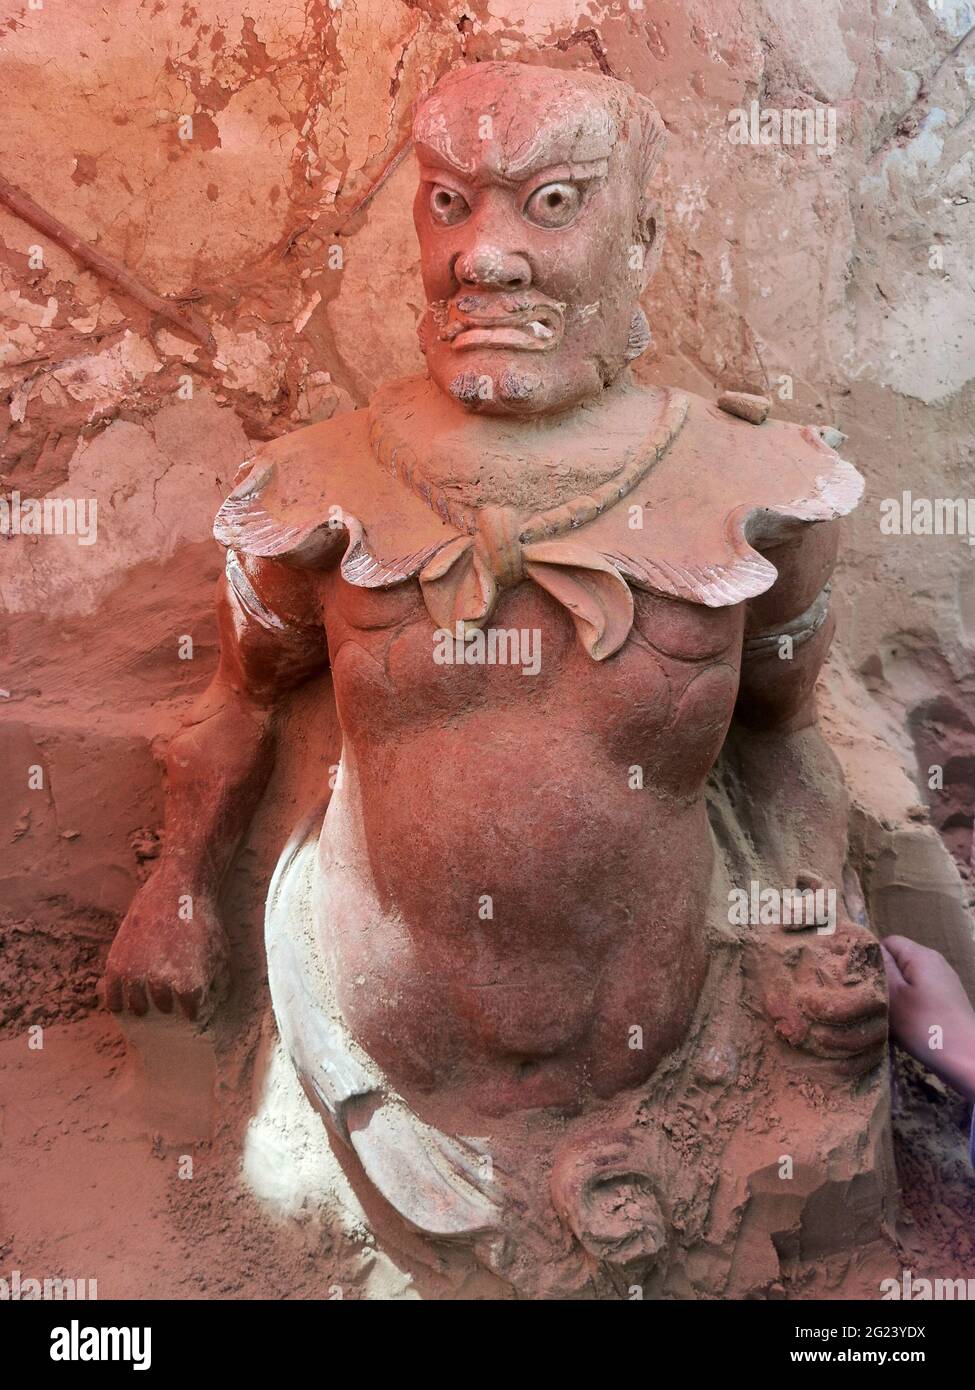 (210608) -- XI'AN, June 8, 2021 (Xinhua) -- File photo taken on May 24, 2020 shows a clay statue unearthed from the remains of the Qingpingbao castle, located in Jingbian County, Yulin City of northwest China's Shaanxi Province. The remains of a Great Wall castle dating back to the Ming Dynasty (1368-1644) were discovered in northwest China's Shaanxi Province, said the Shaanxi Academy of Archaeology Tuesday.   Architectural relics, including two courtyards, were found at the remains of the Qingpingbao castle. (Xinhua) Stock Photo